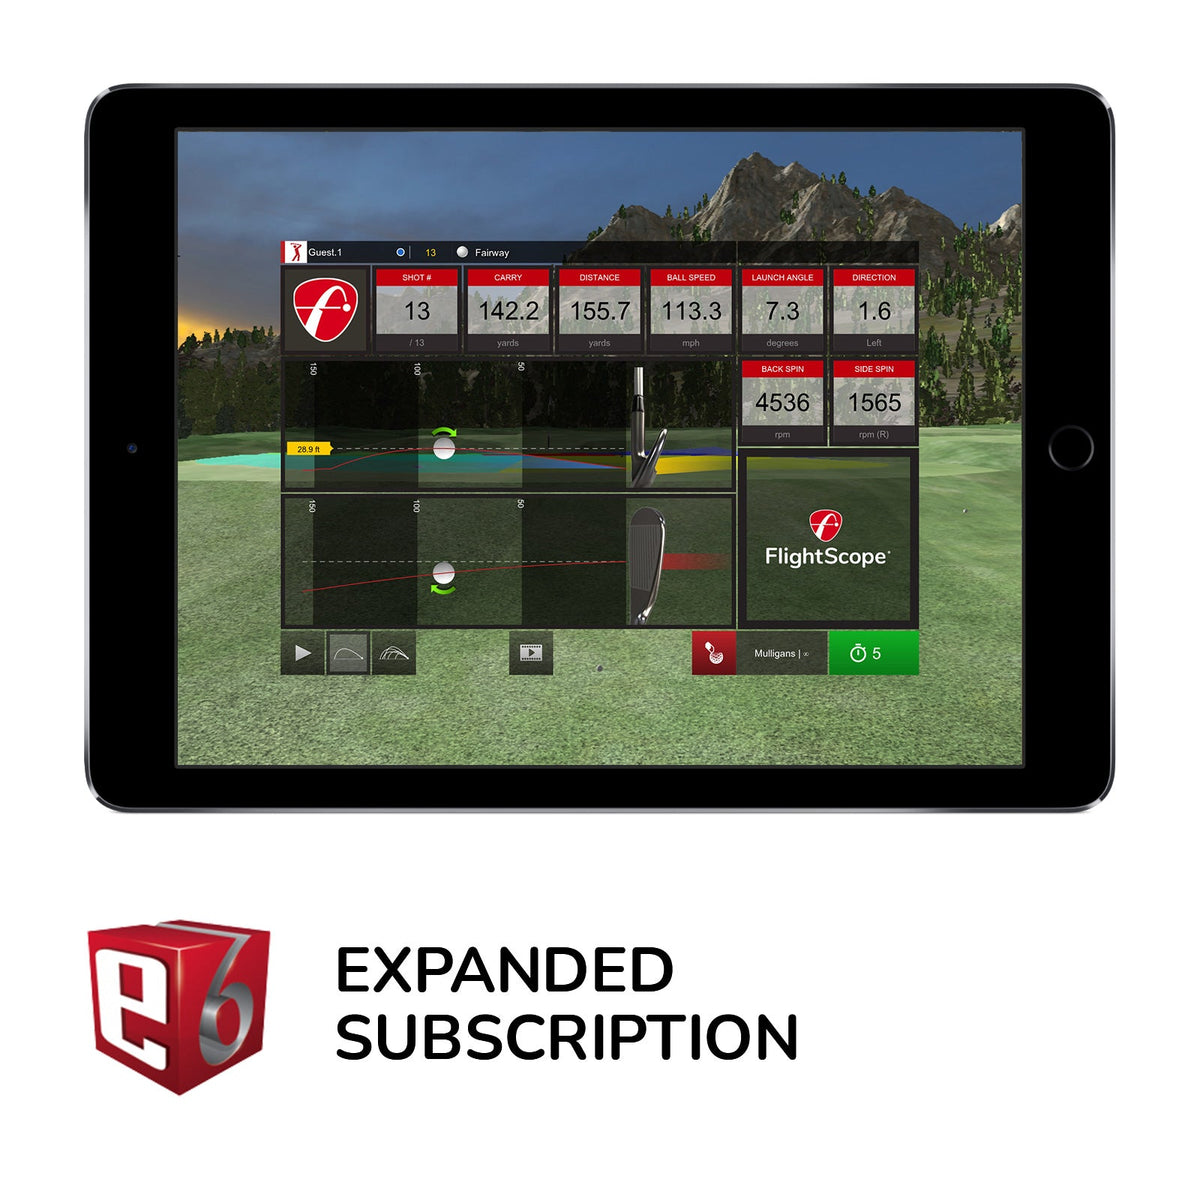 FlightScope - TruGolf E6 Connect - Annual Expanded Subscription Plan